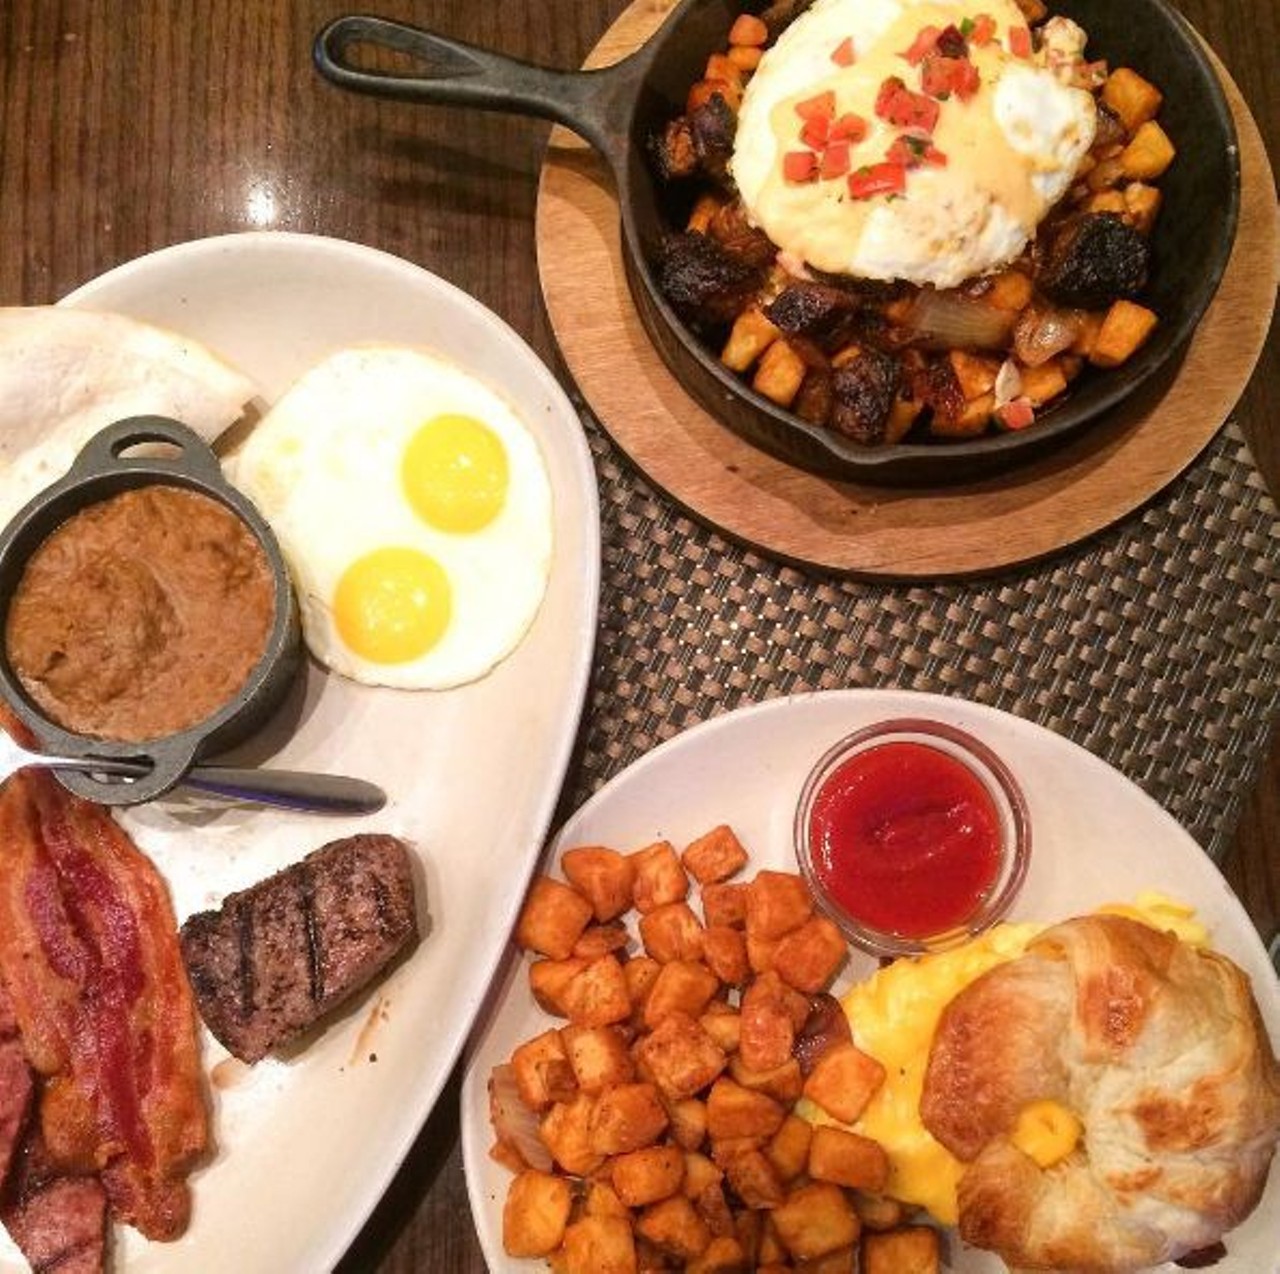 Cibolo Moon
23808 Resort Parkway, (210) 276-2500
Bring your appetite to Cibolo Moon&#146;s brunch buffet and take advantage of the tequila bar.
Photo via Instagram, s.a.vory